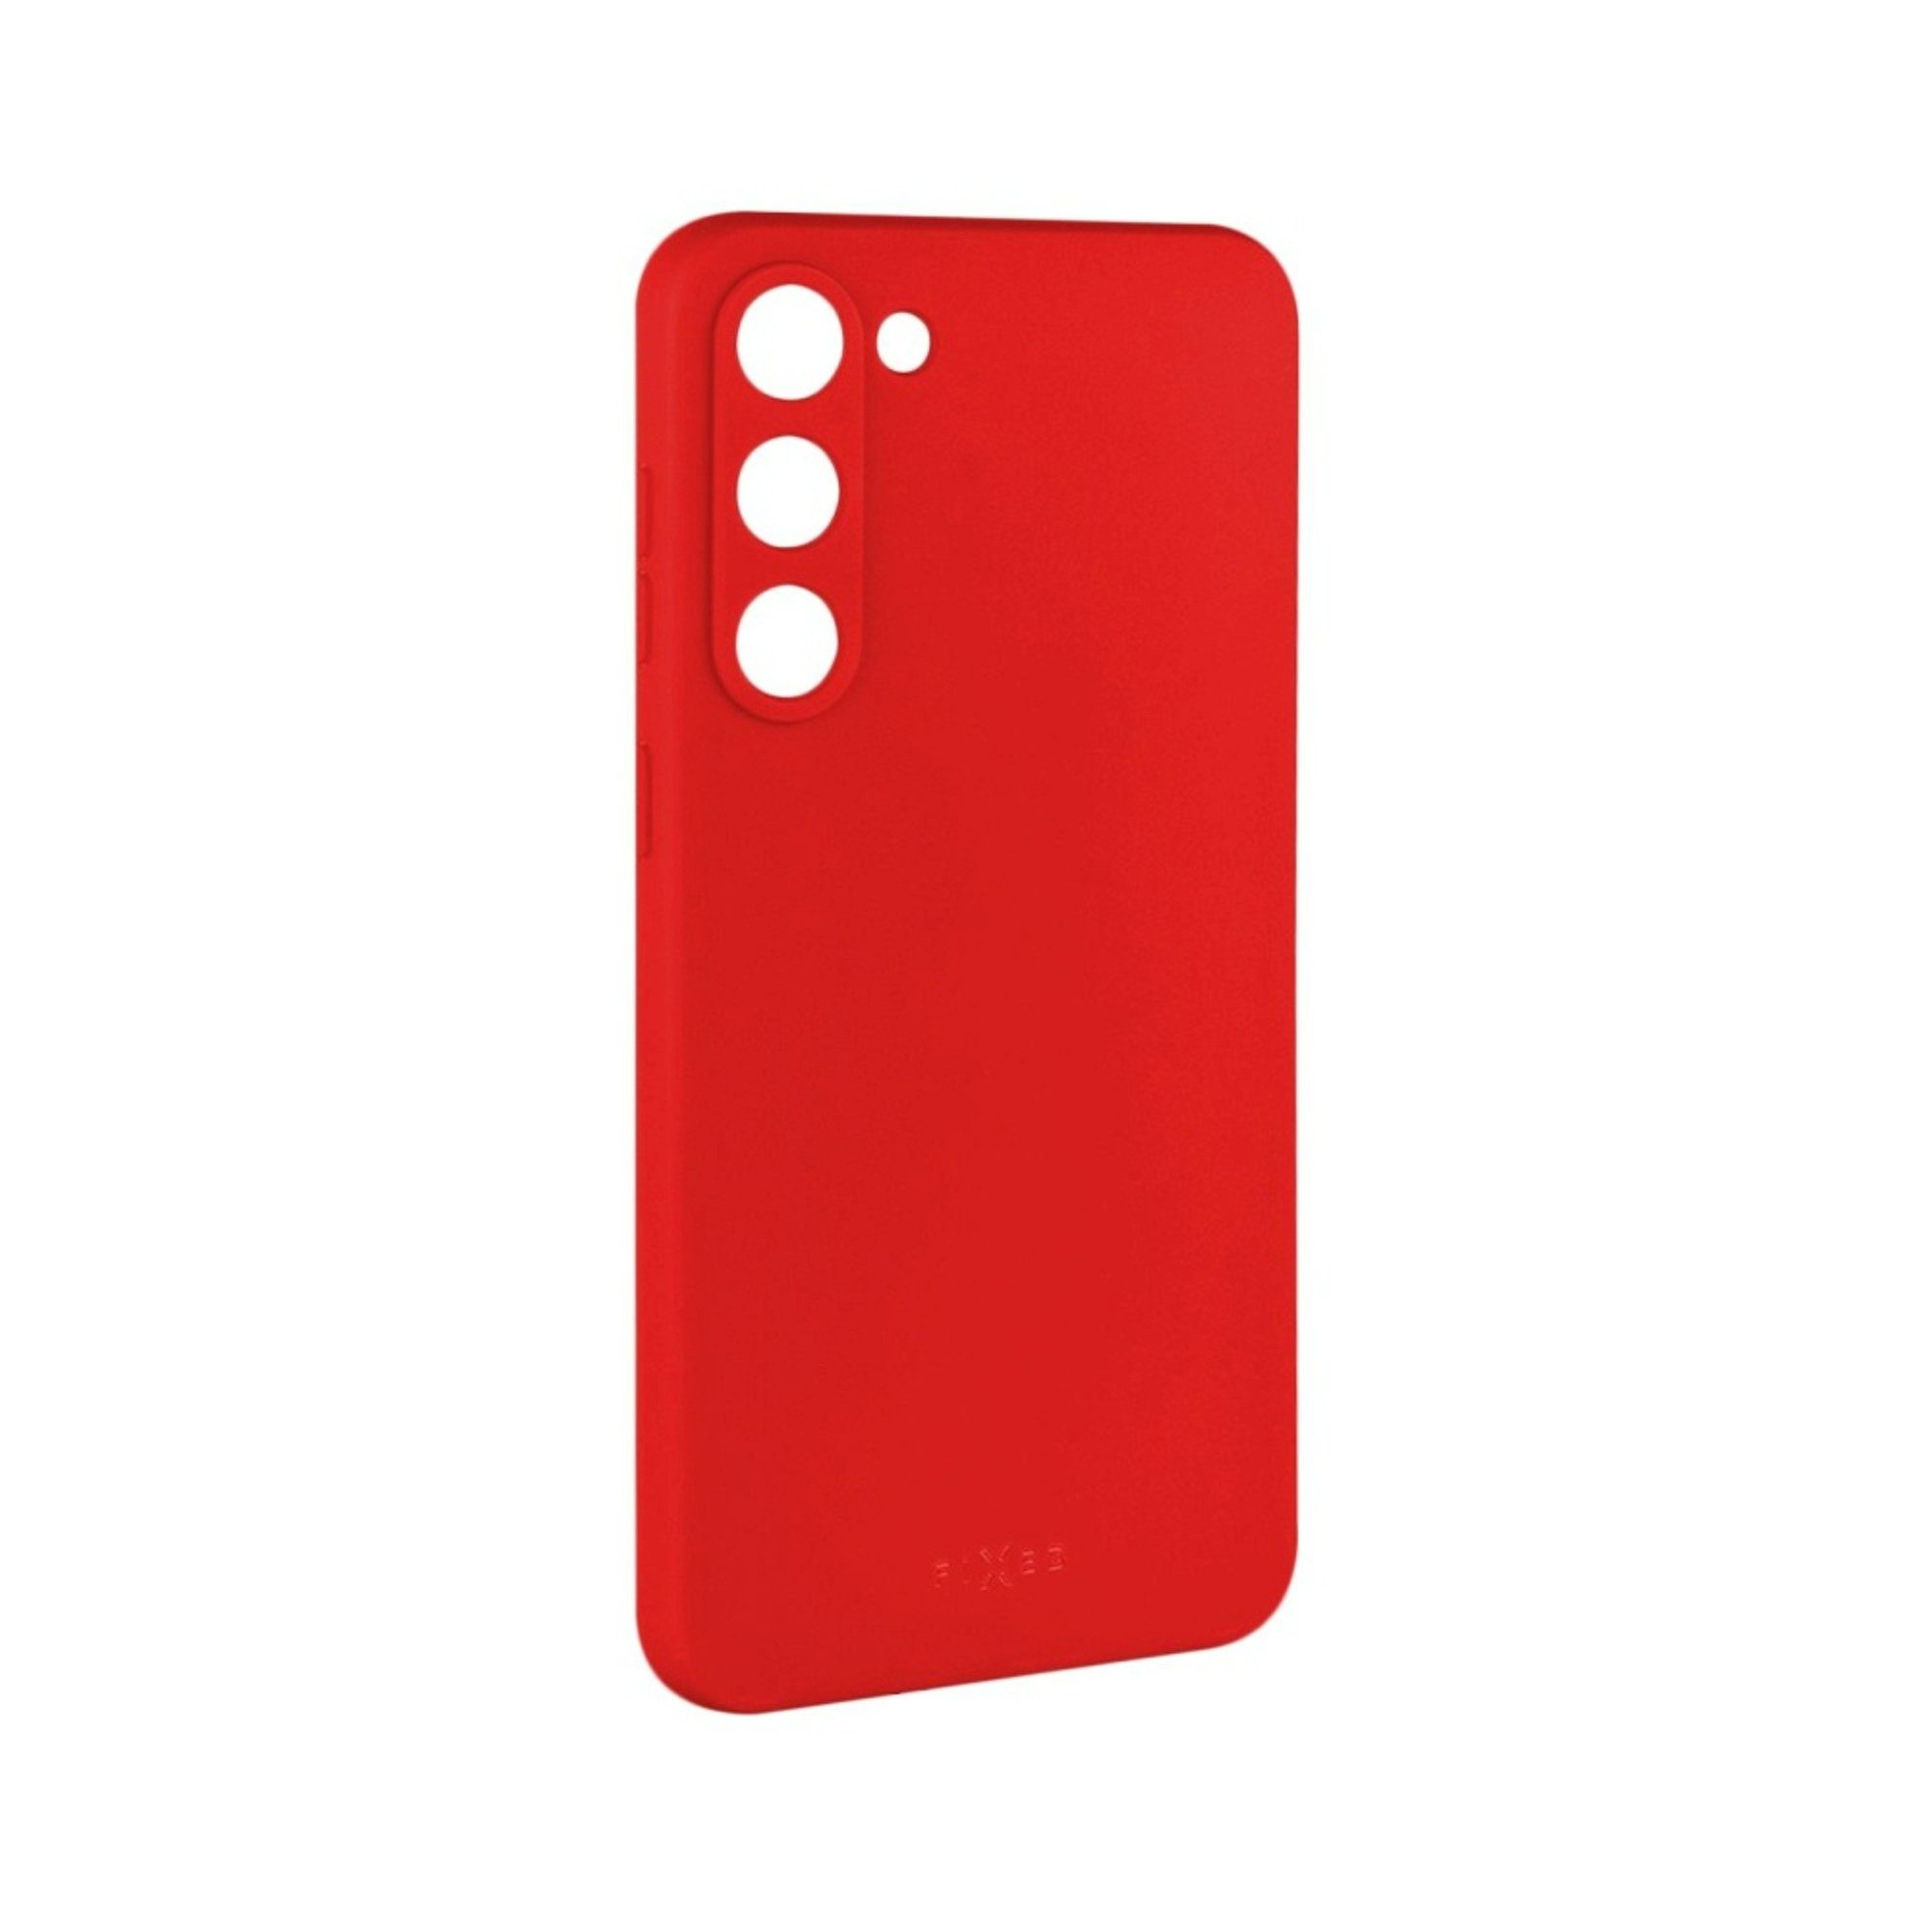 S23, Backcover, Rot FIXST-1040-RD, FIXED Samsung, Galaxy